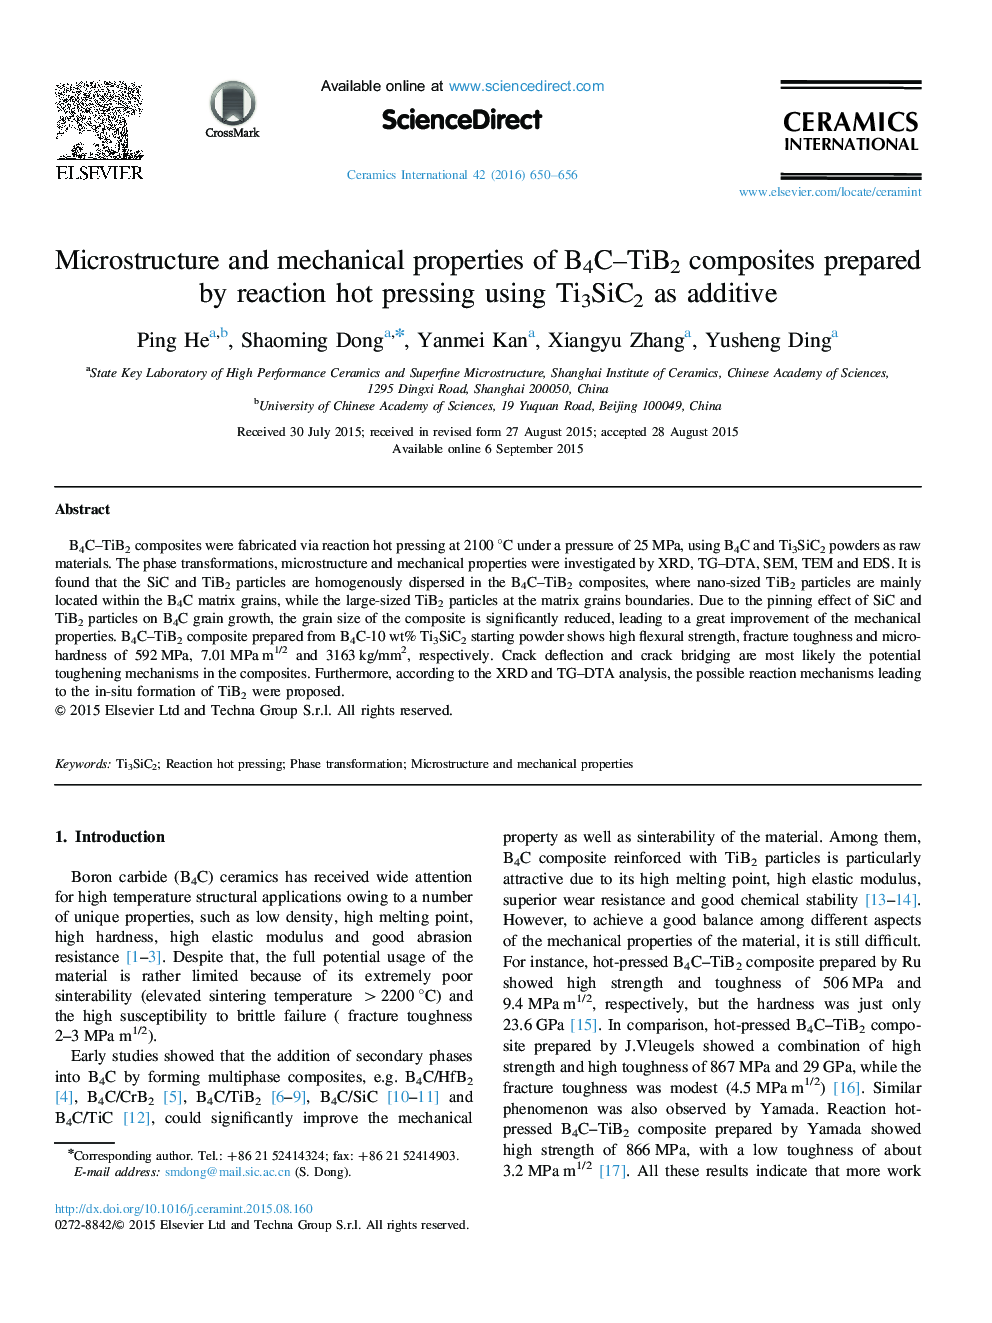 Microstructure and mechanical properties of B4C–TiB2 composites prepared by reaction hot pressing using Ti3SiC2 as additive